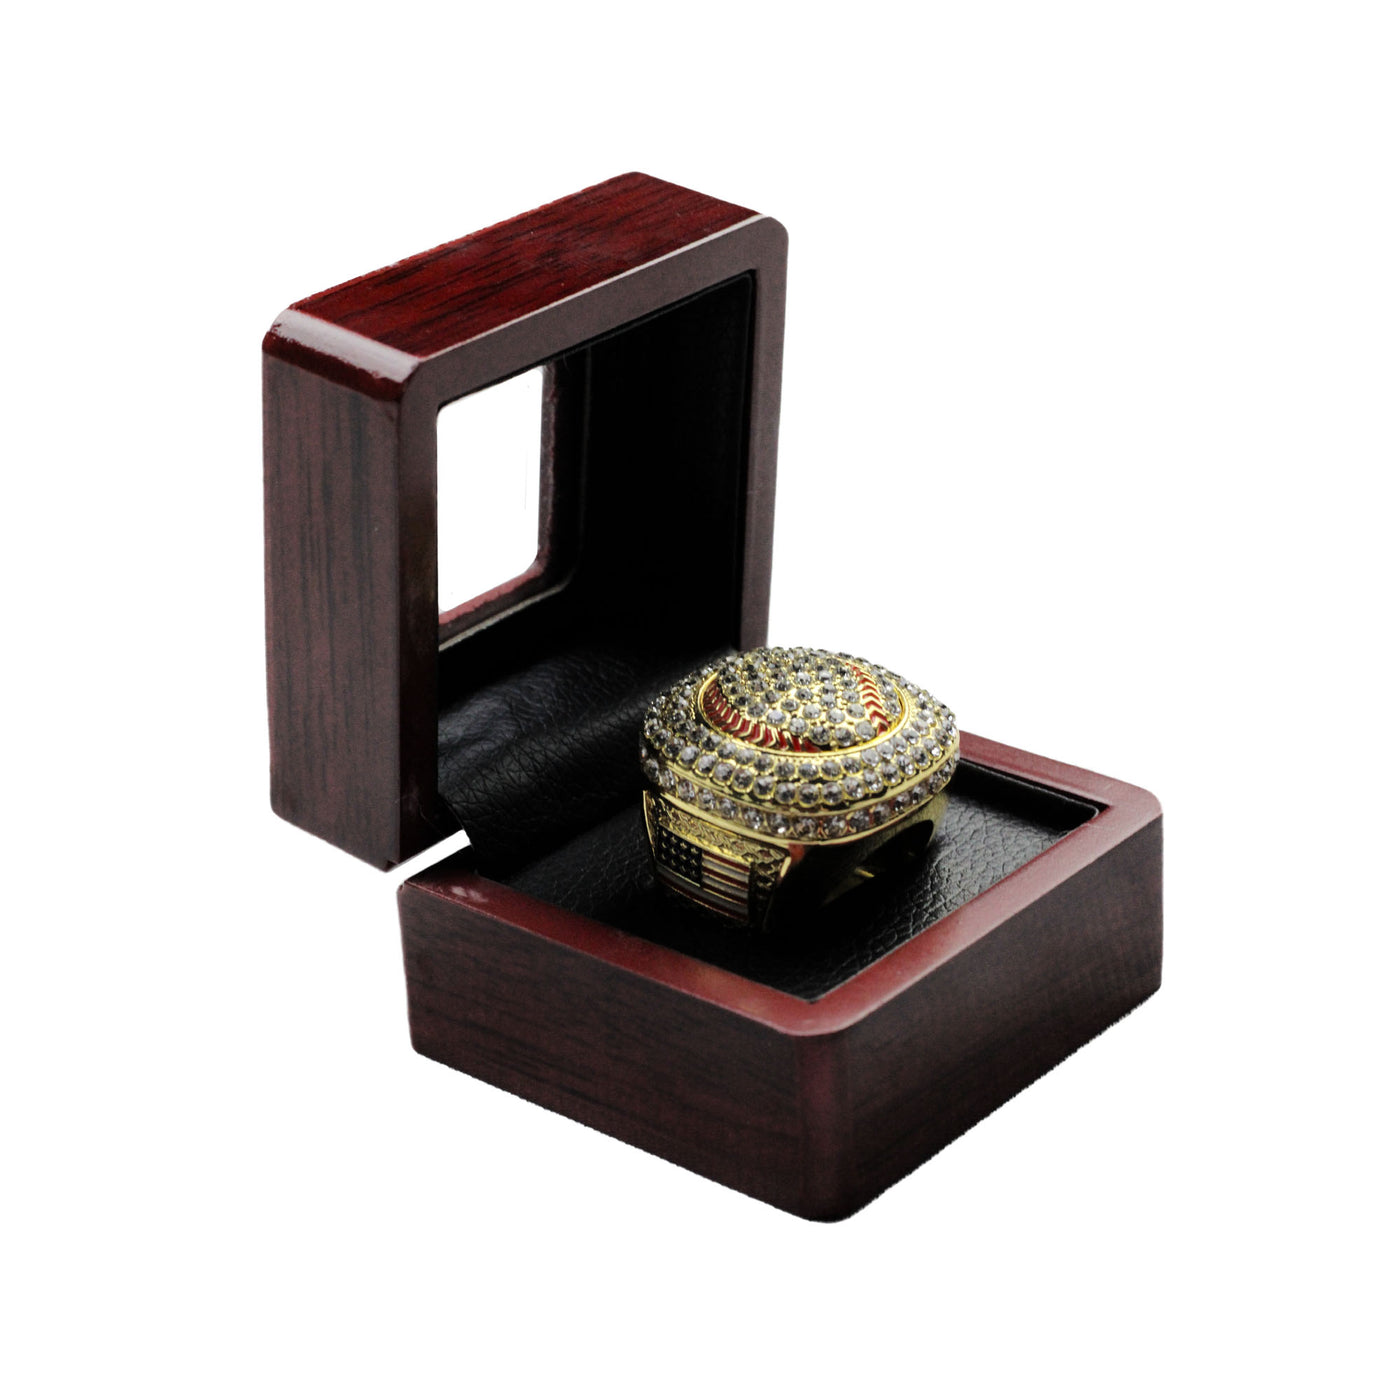 RING BOX - Style 2 (holds 1) - RESTOCKING END OF SUMMER